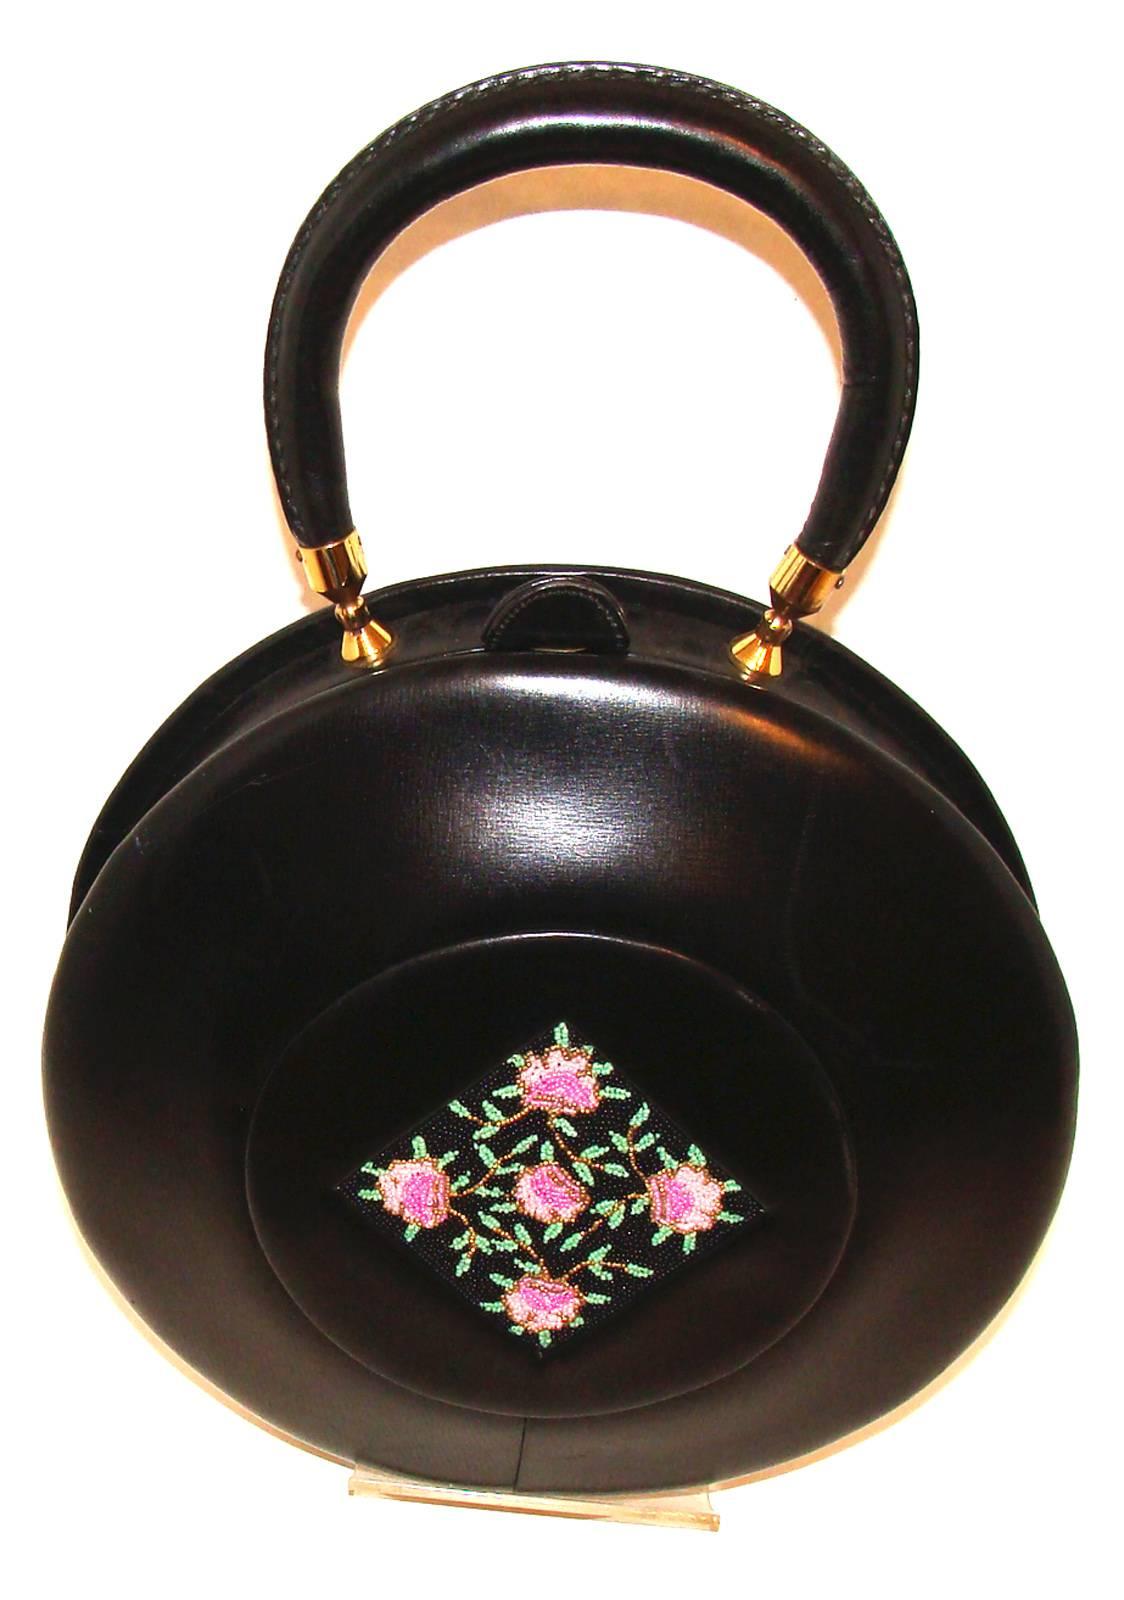 This rare  bag was consigned by a long-time customer who is paring down her collection as she downsizes.  (We have several of these customers who have collected and purchased from us since the late 1980's and are now beginning to downsize.)   It is